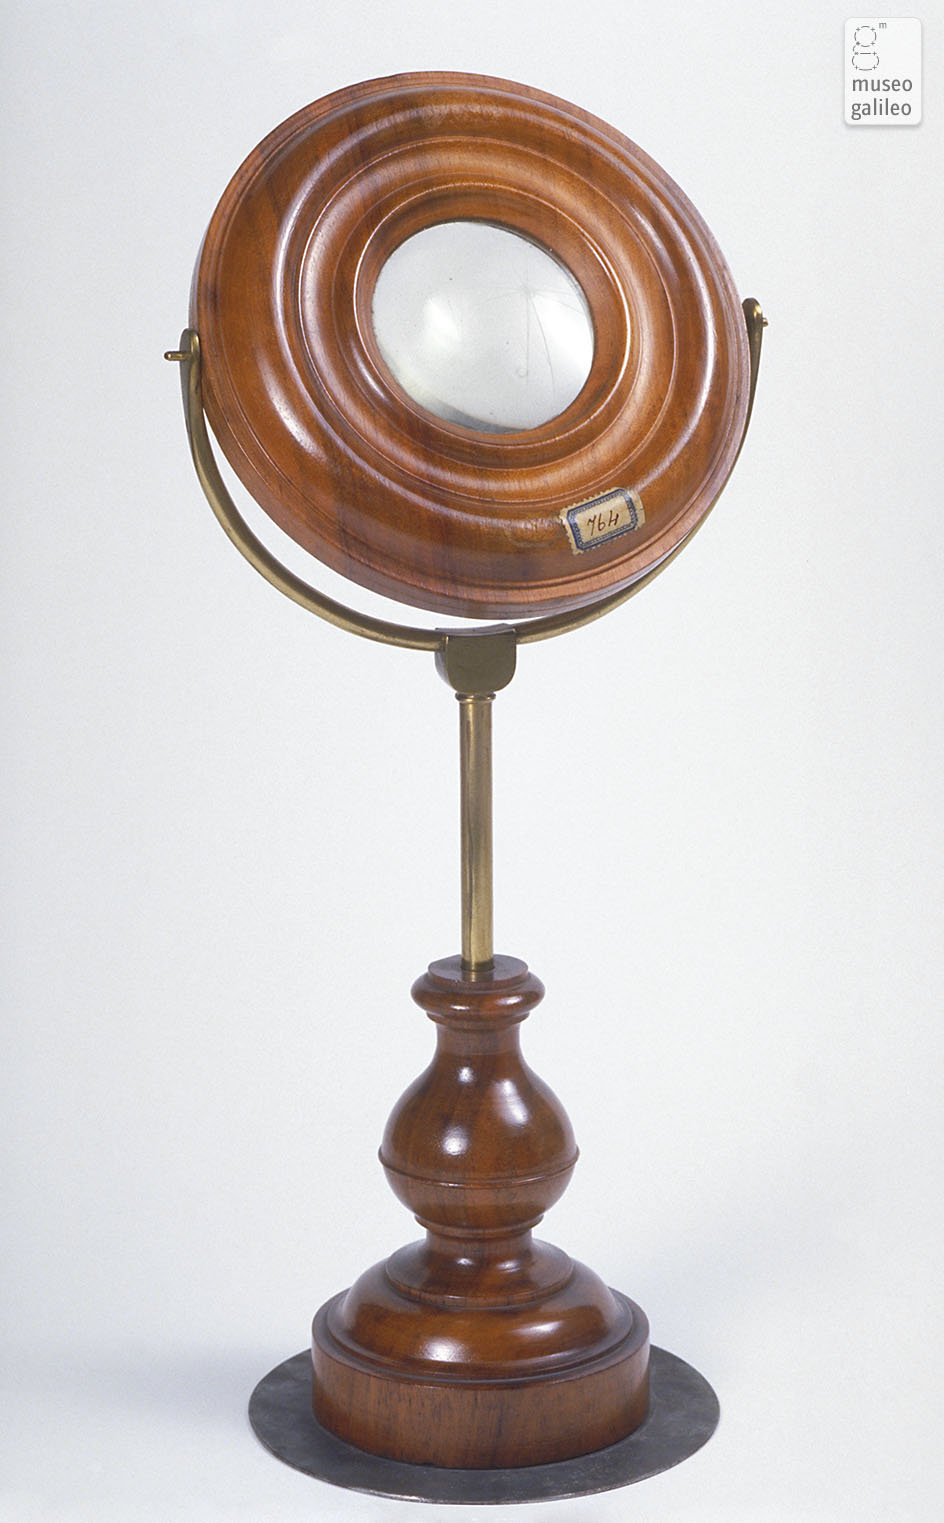 Lens with mount (Inv. 764)